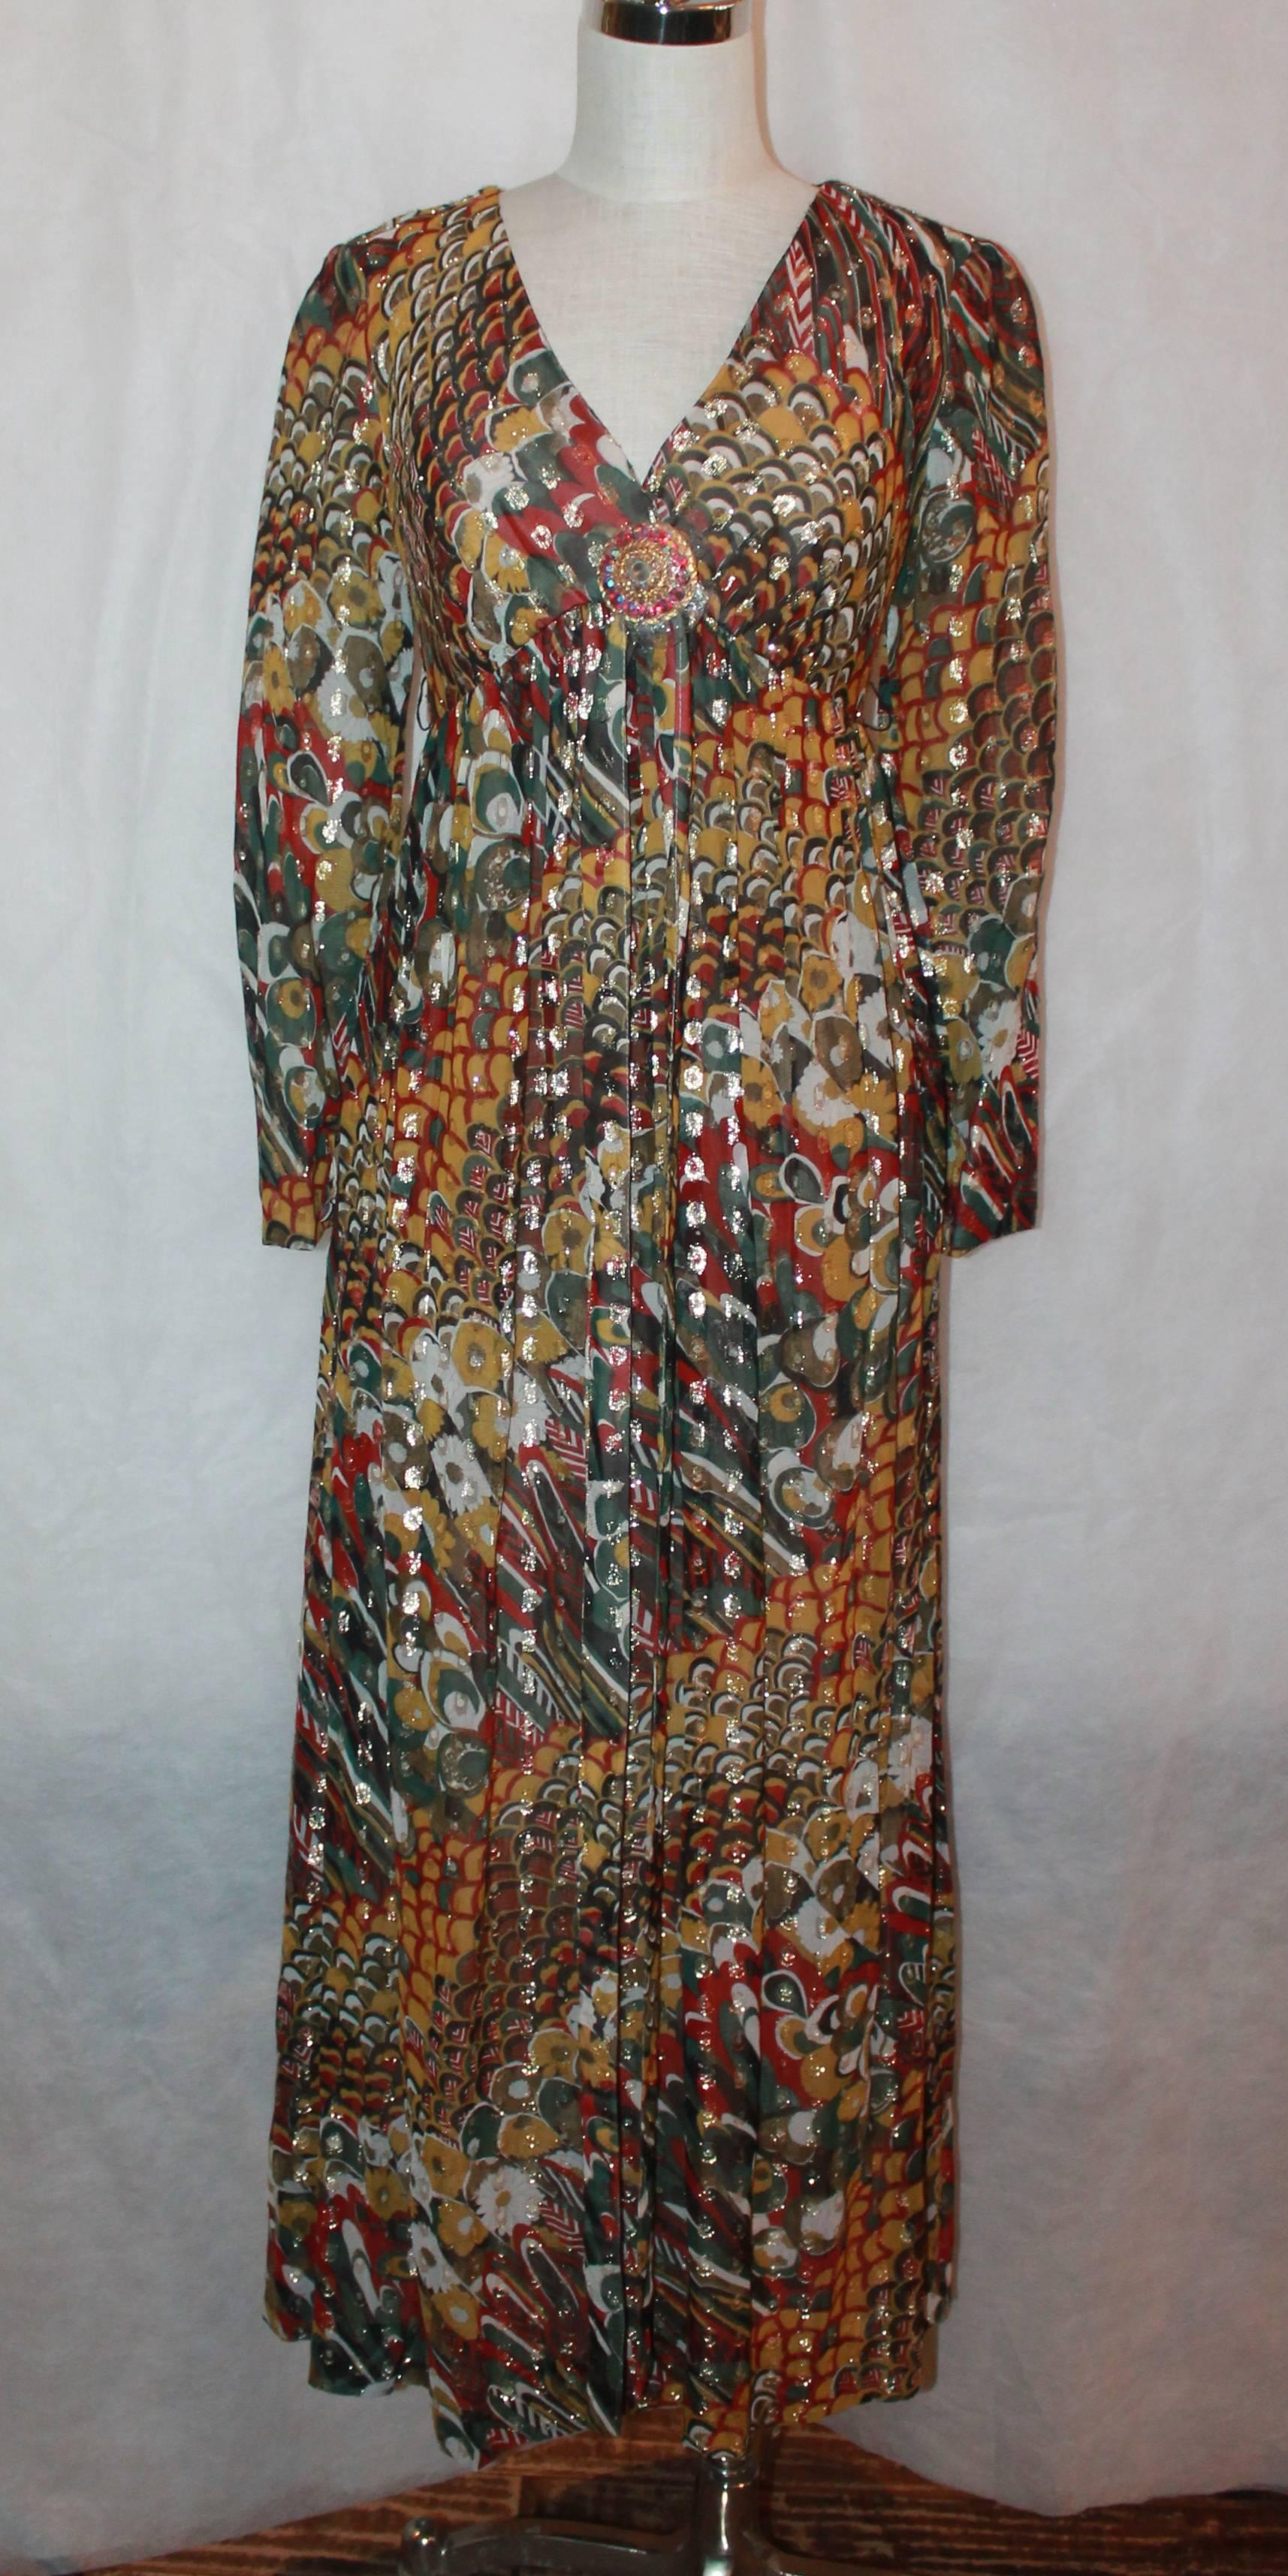 Adele Simpson 1950's Vintage Multi Mod Brocade Long Sleeve Dress - 8.  This long sleeve mod brocade dress features a rhinestone gold brooch with yellow, green, and red stones.  This dress is in excellent condition.  

Measurements:
Bust: